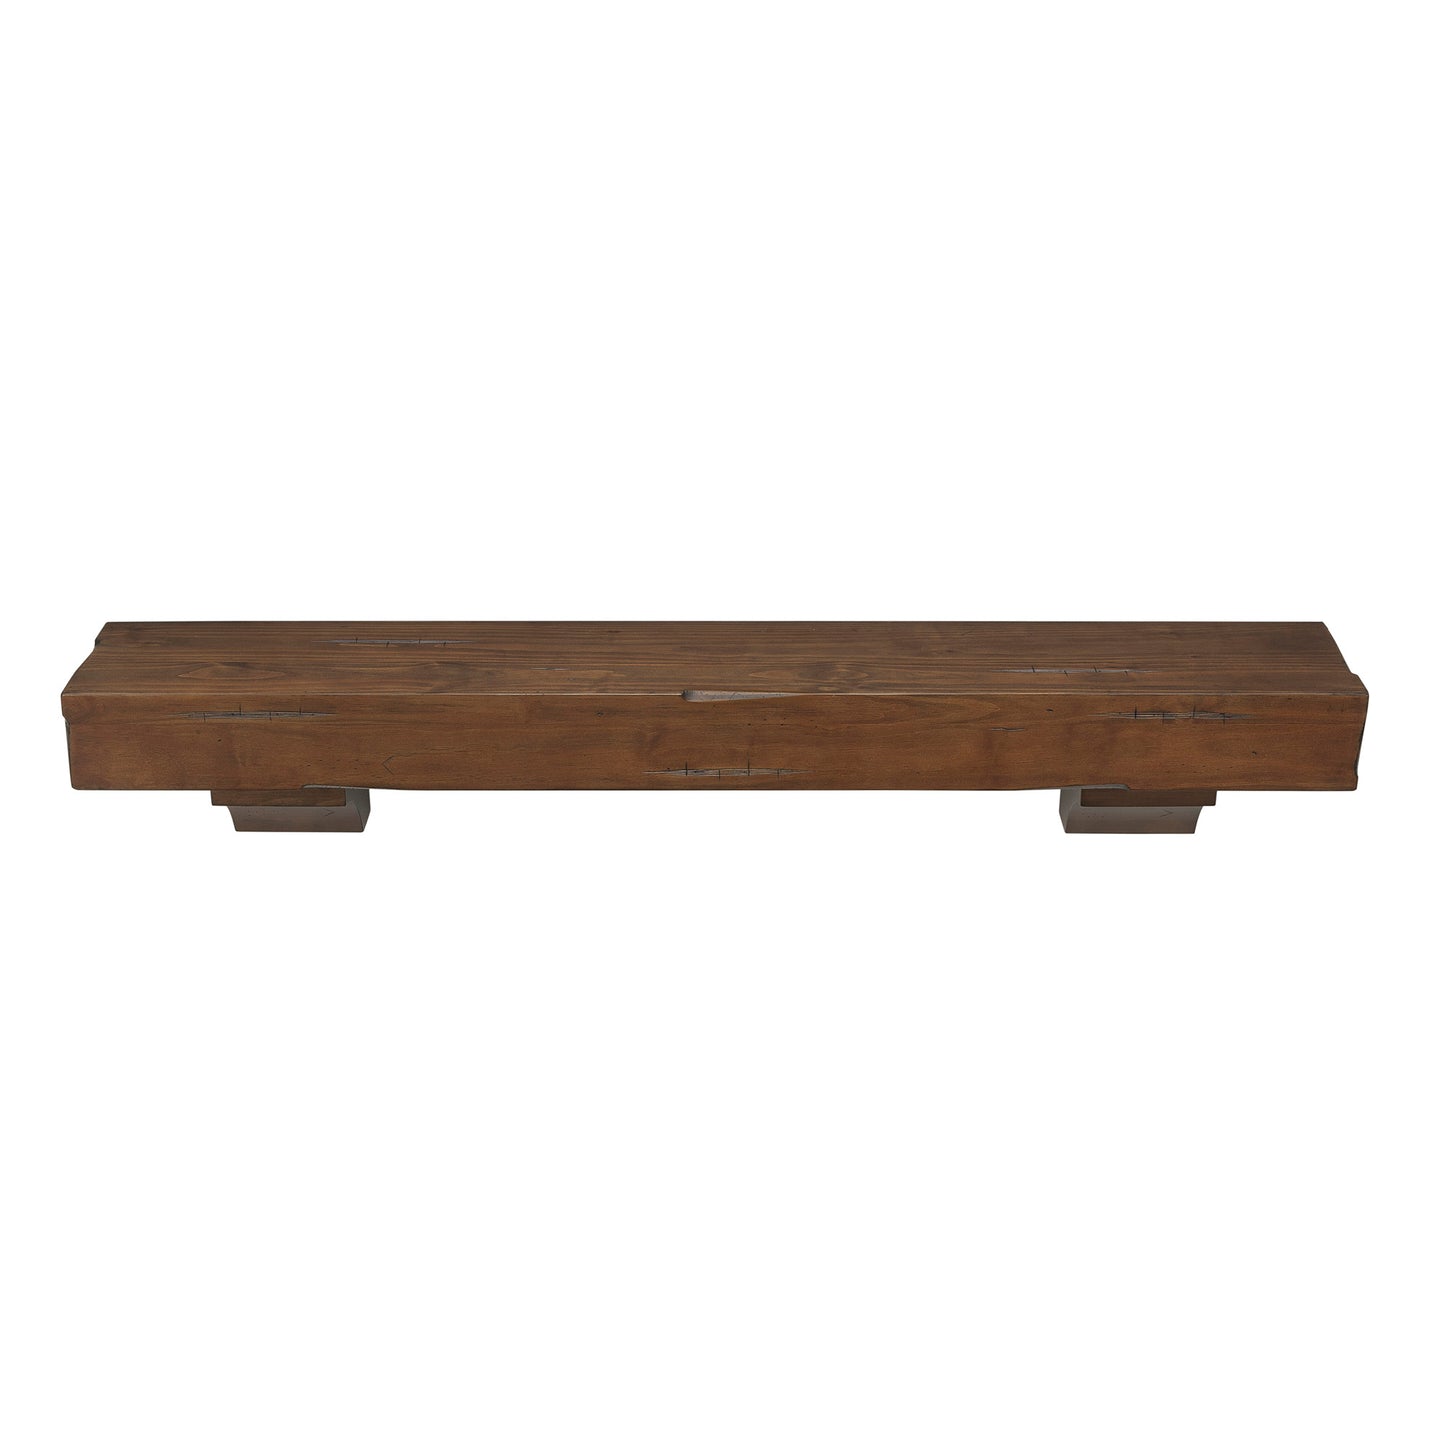 Pearl Mantels 60" Shenandoah Fireplace Mantel with Corbels 412-60-70 - Cherry Distressed Finish